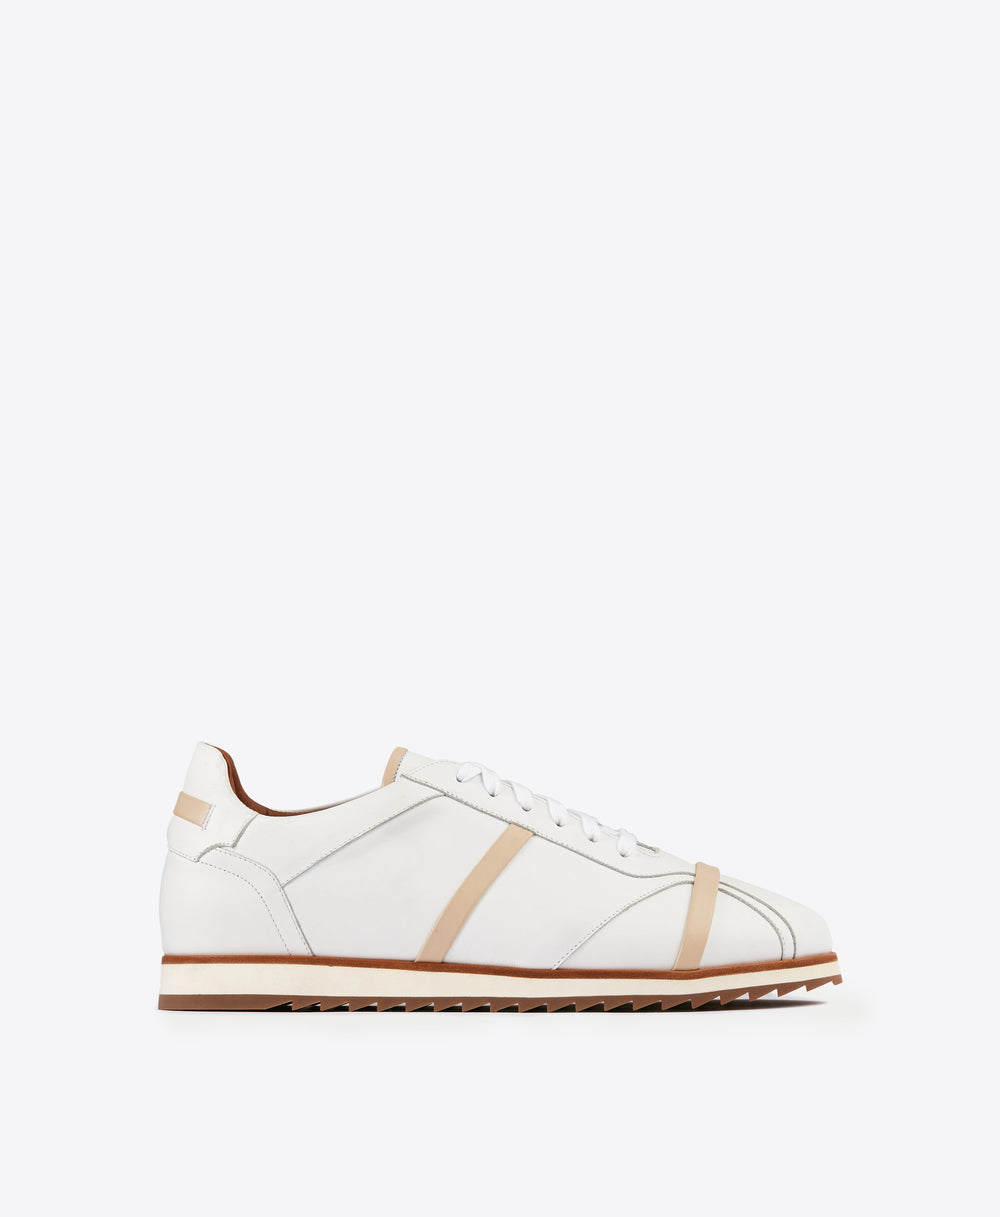 Men's Malone Souliers White Leather Sneakers